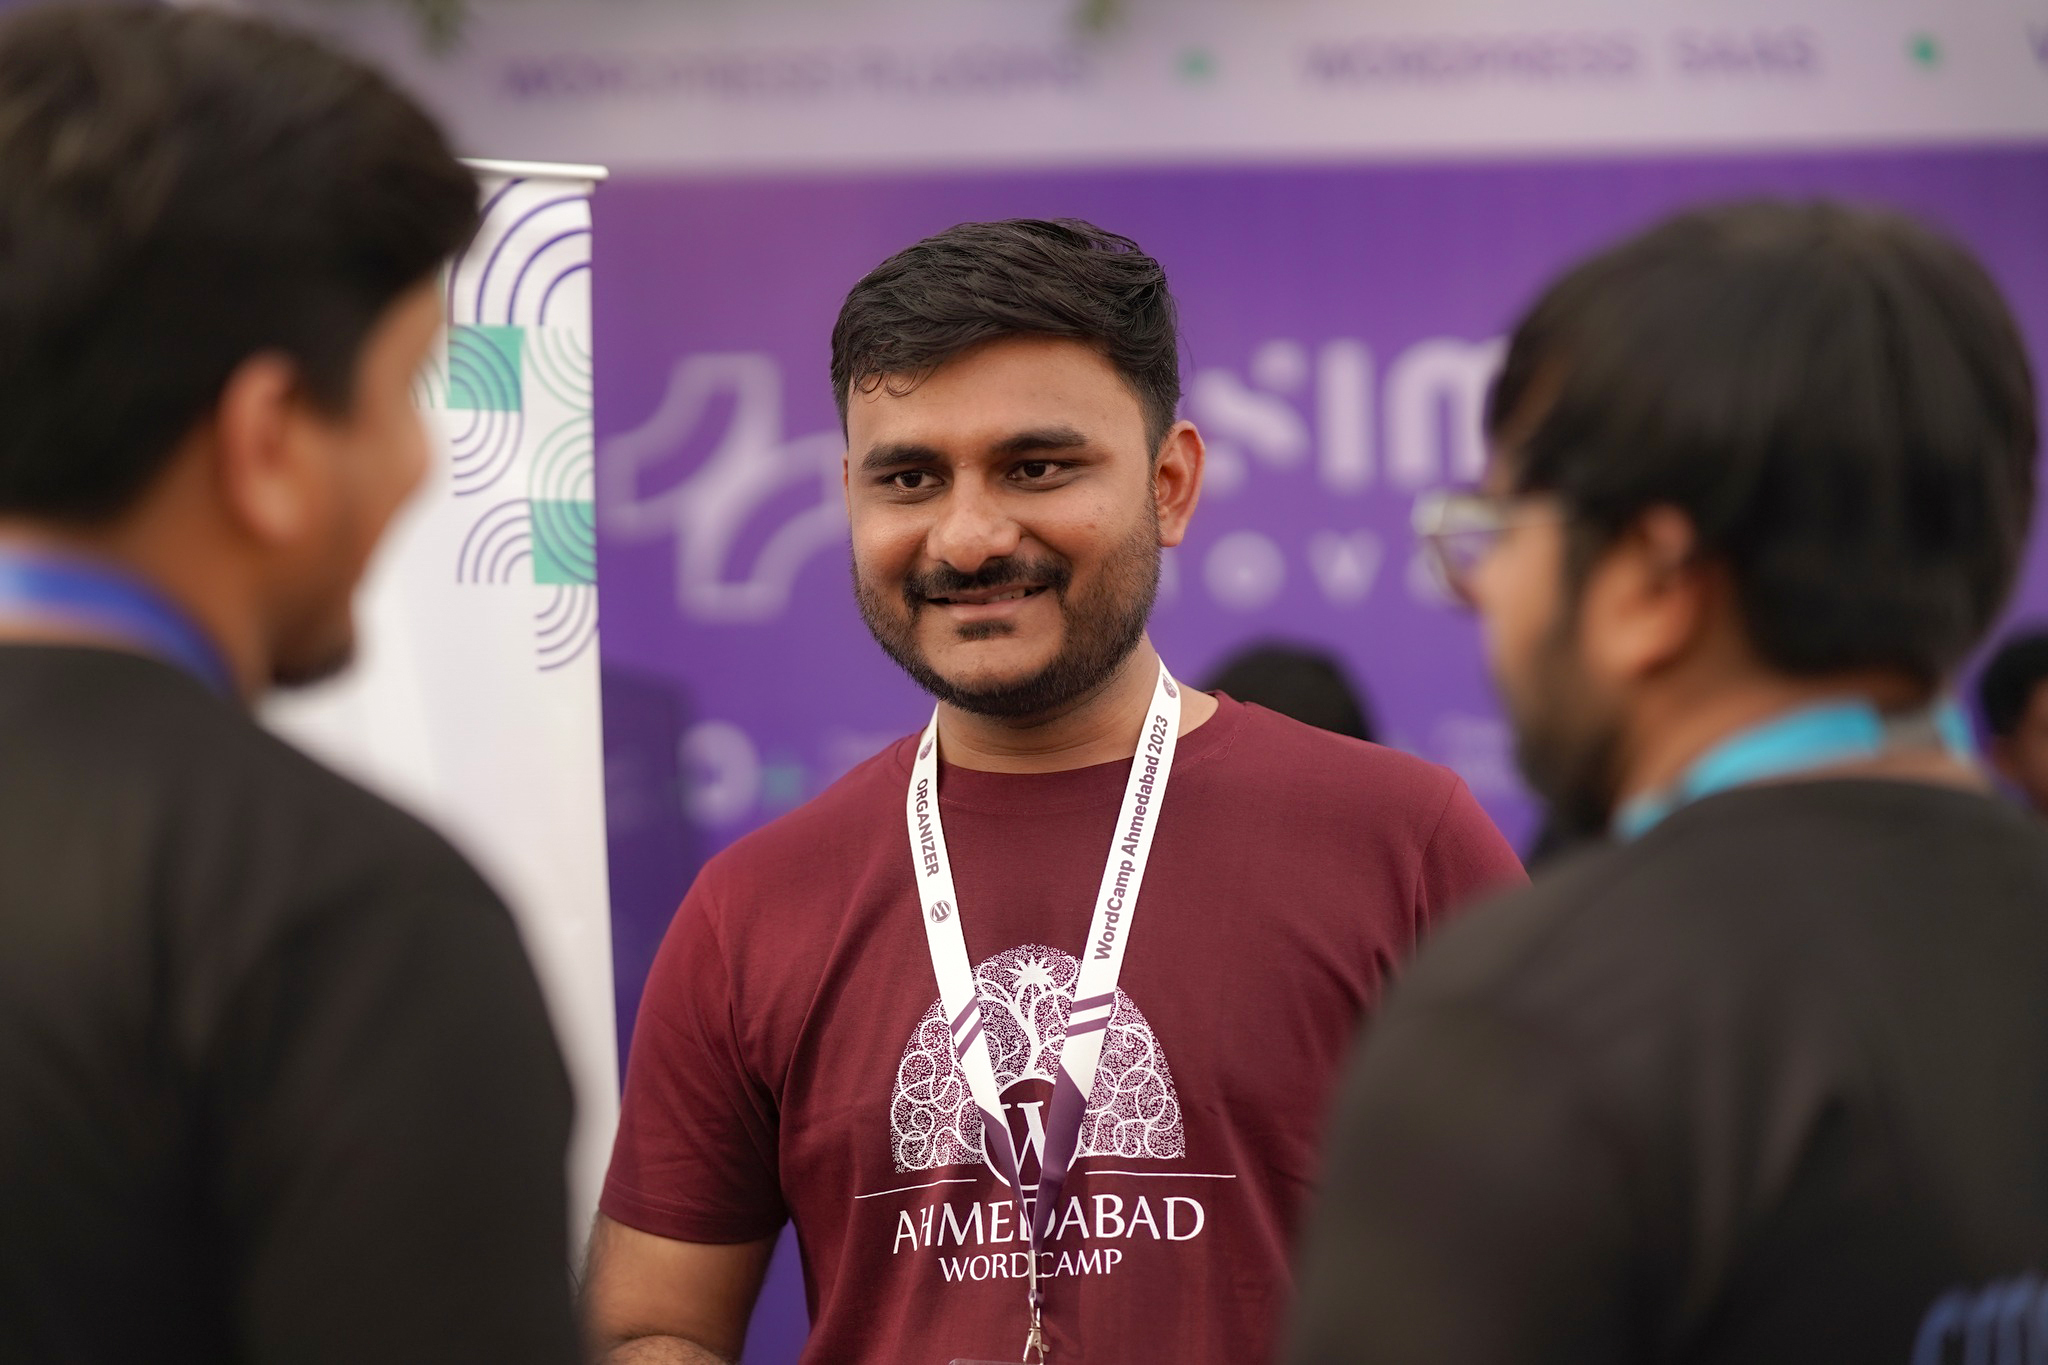 My journey being First Time WordCamp Organiser : Takeaways and Challenges